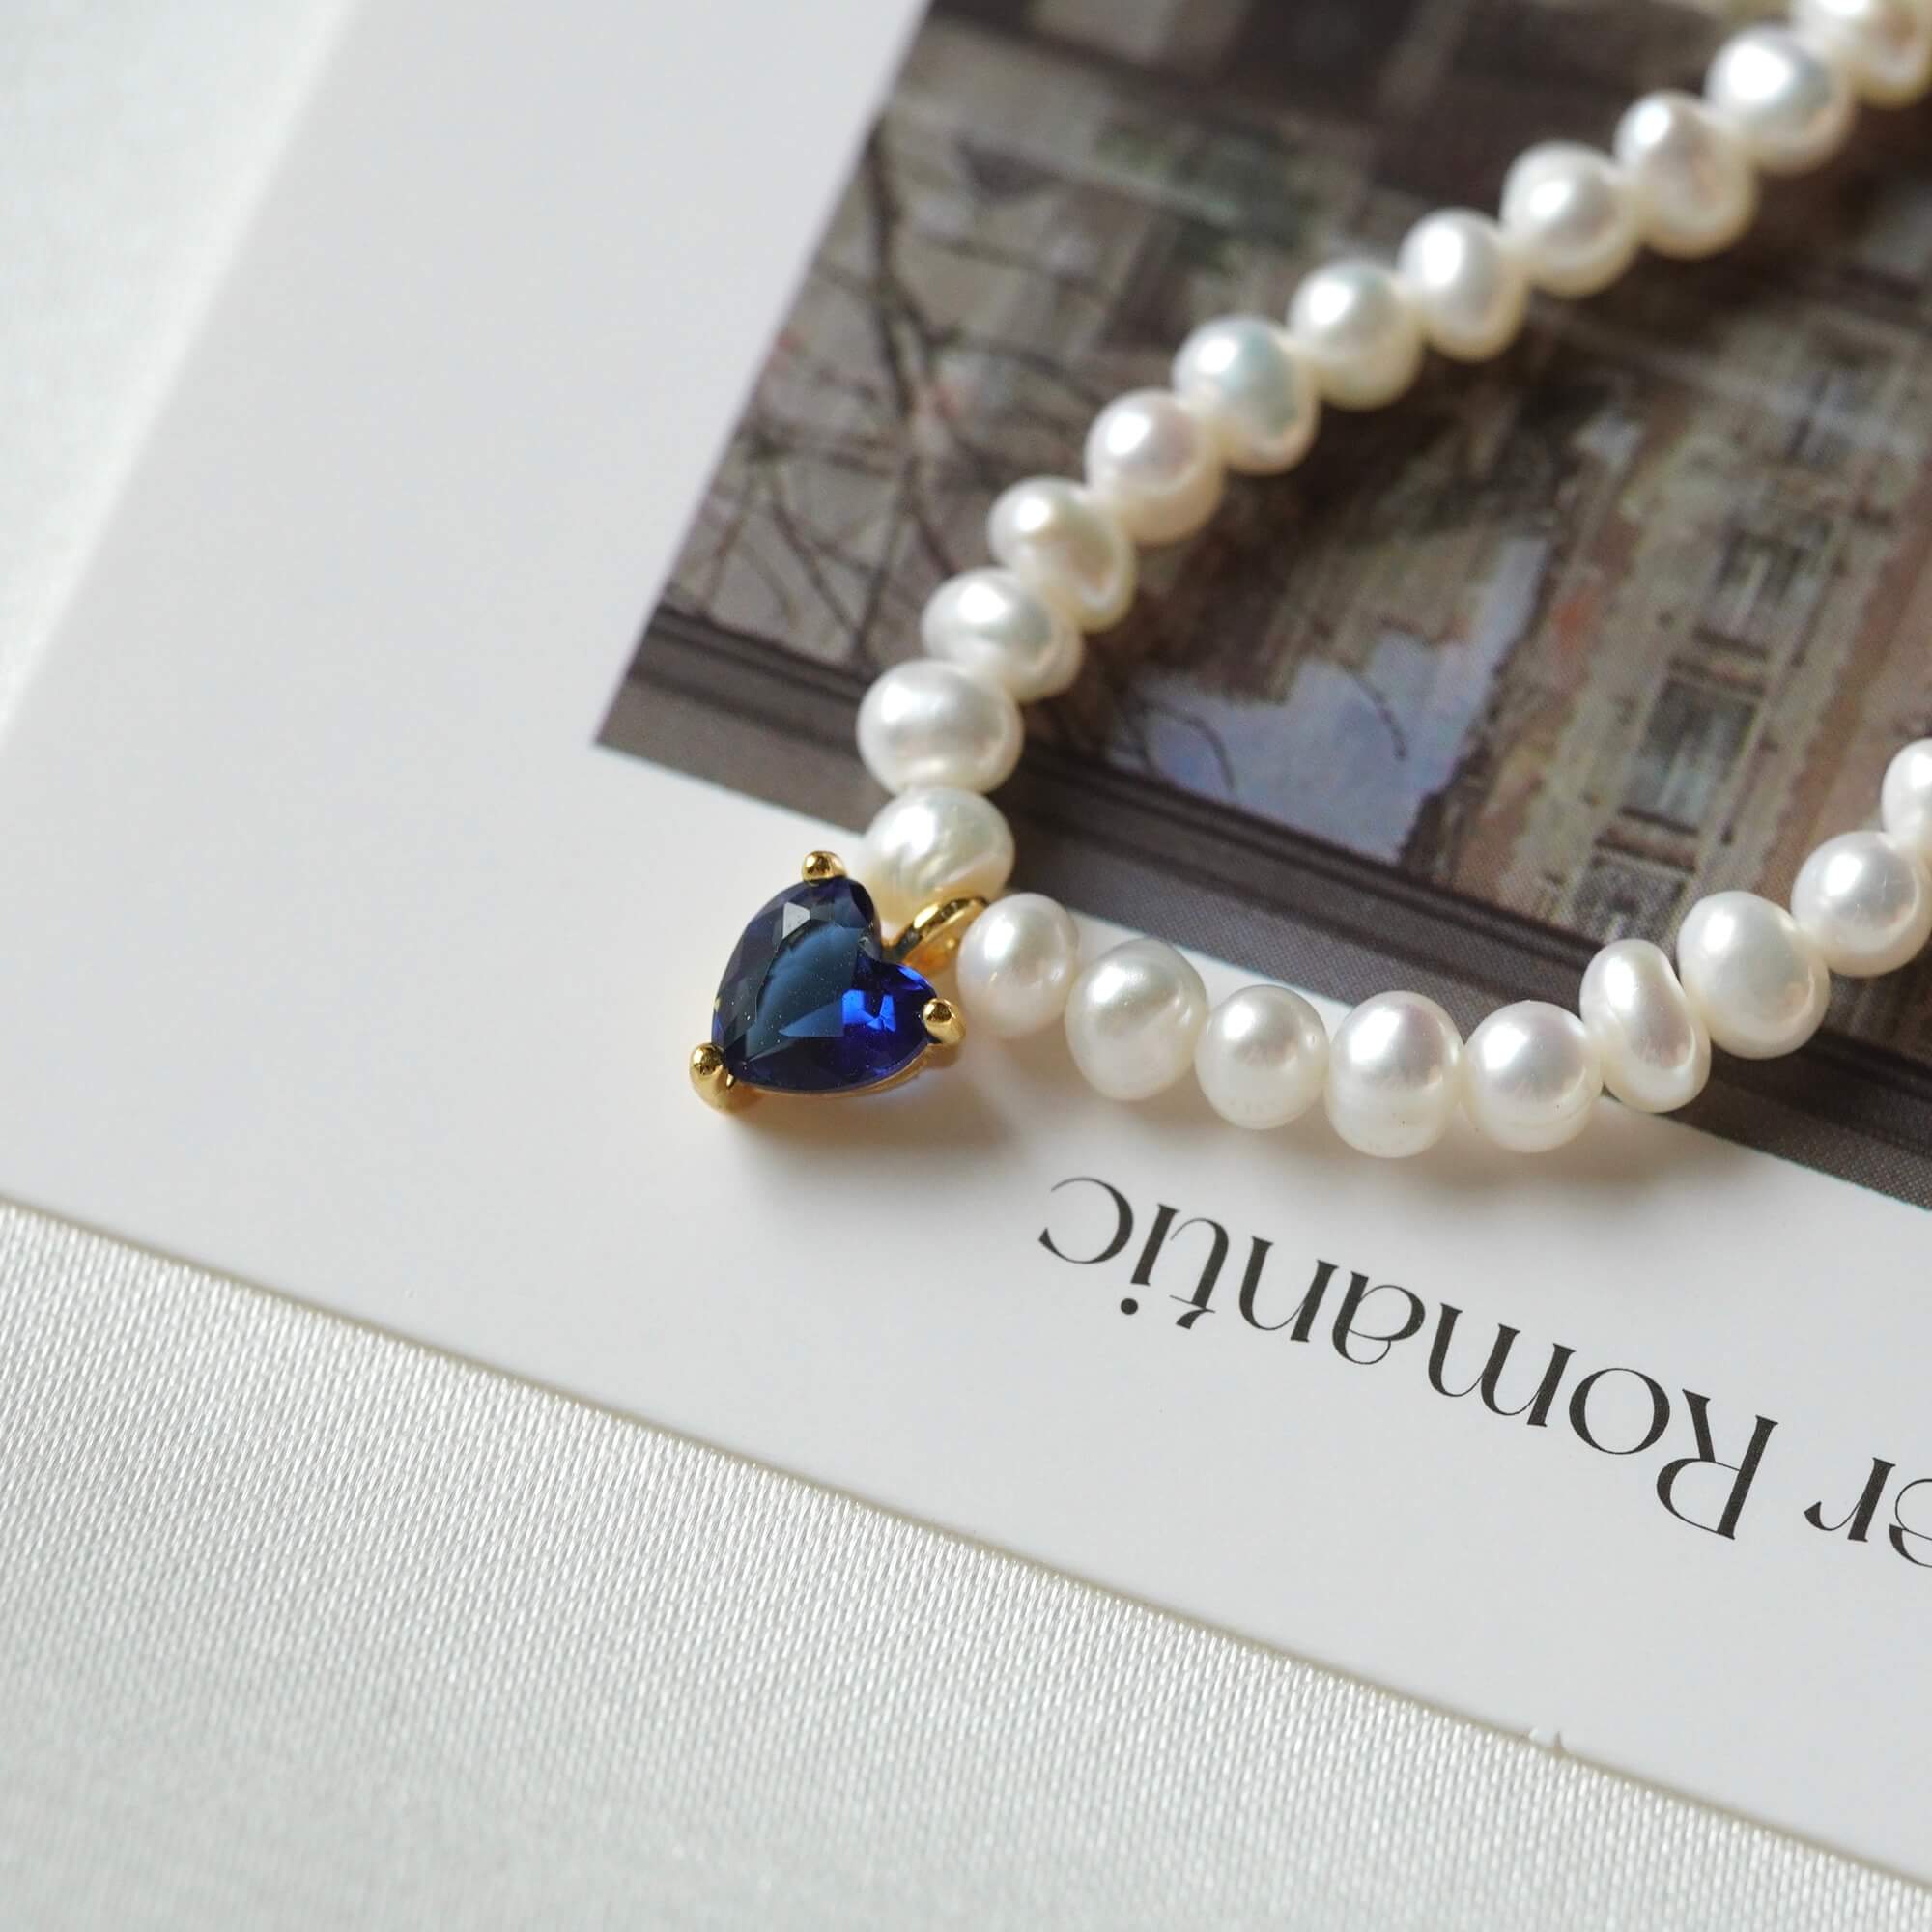 Crystal Heart Pearl Necklace